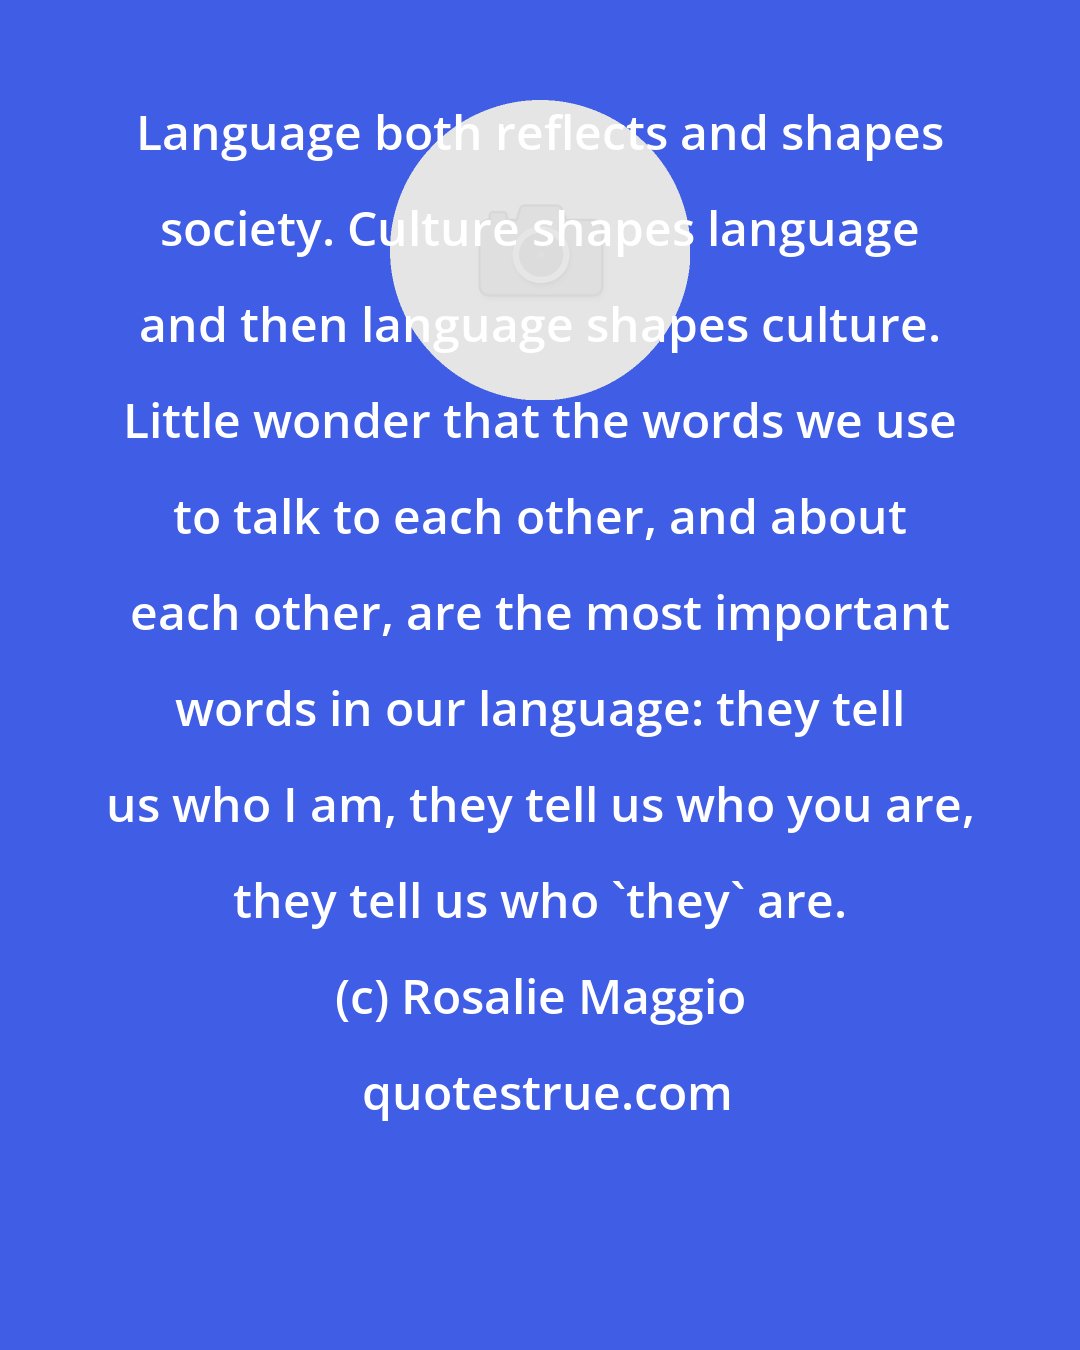 Rosalie Maggio: Language both reflects and shapes society. Culture shapes language and then language shapes culture. Little wonder that the words we use to talk to each other, and about each other, are the most important words in our language: they tell us who I am, they tell us who you are, they tell us who 'they' are.